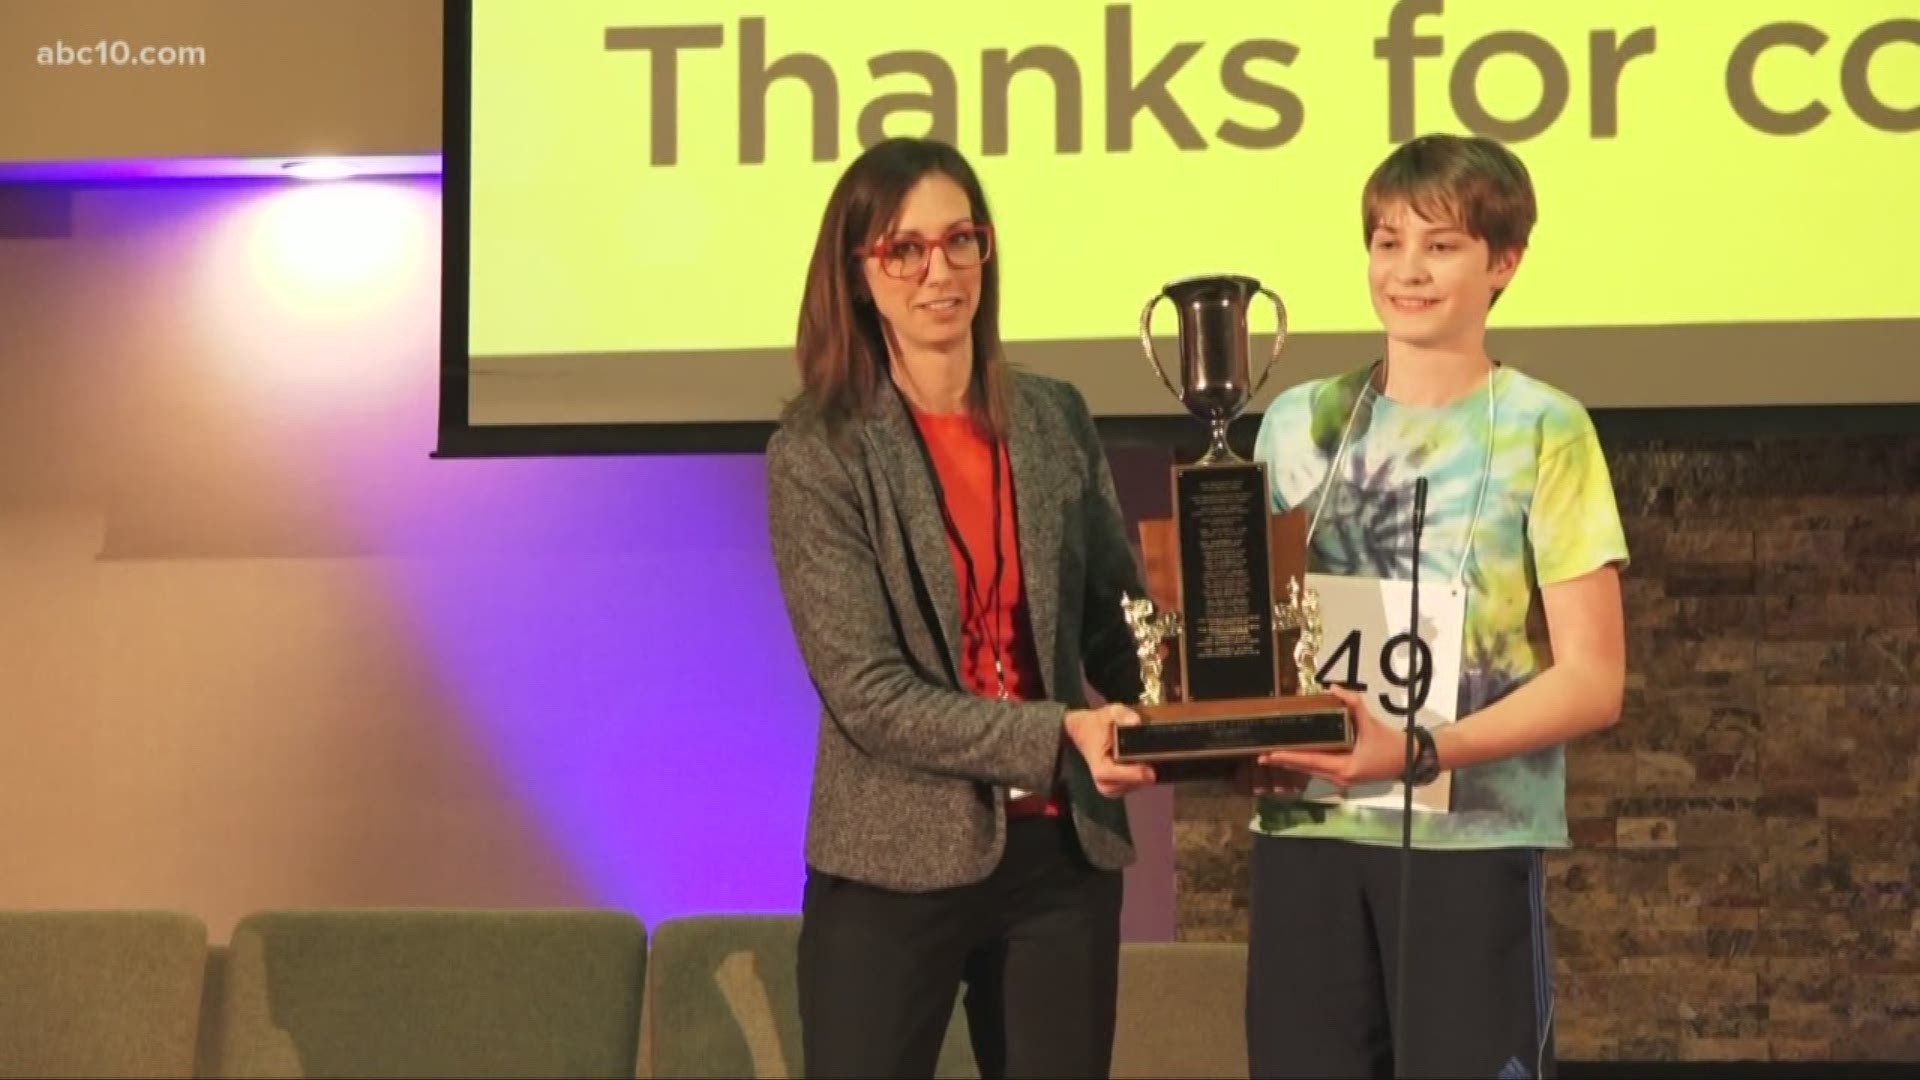 An 8th grader from Arden Middle School will be representing Northern California at the Scripps National Spelling Bee in Washington D.C. in May. Logan Swain was named the winner of the 36th Annual California Central Valley Spelling Bee.